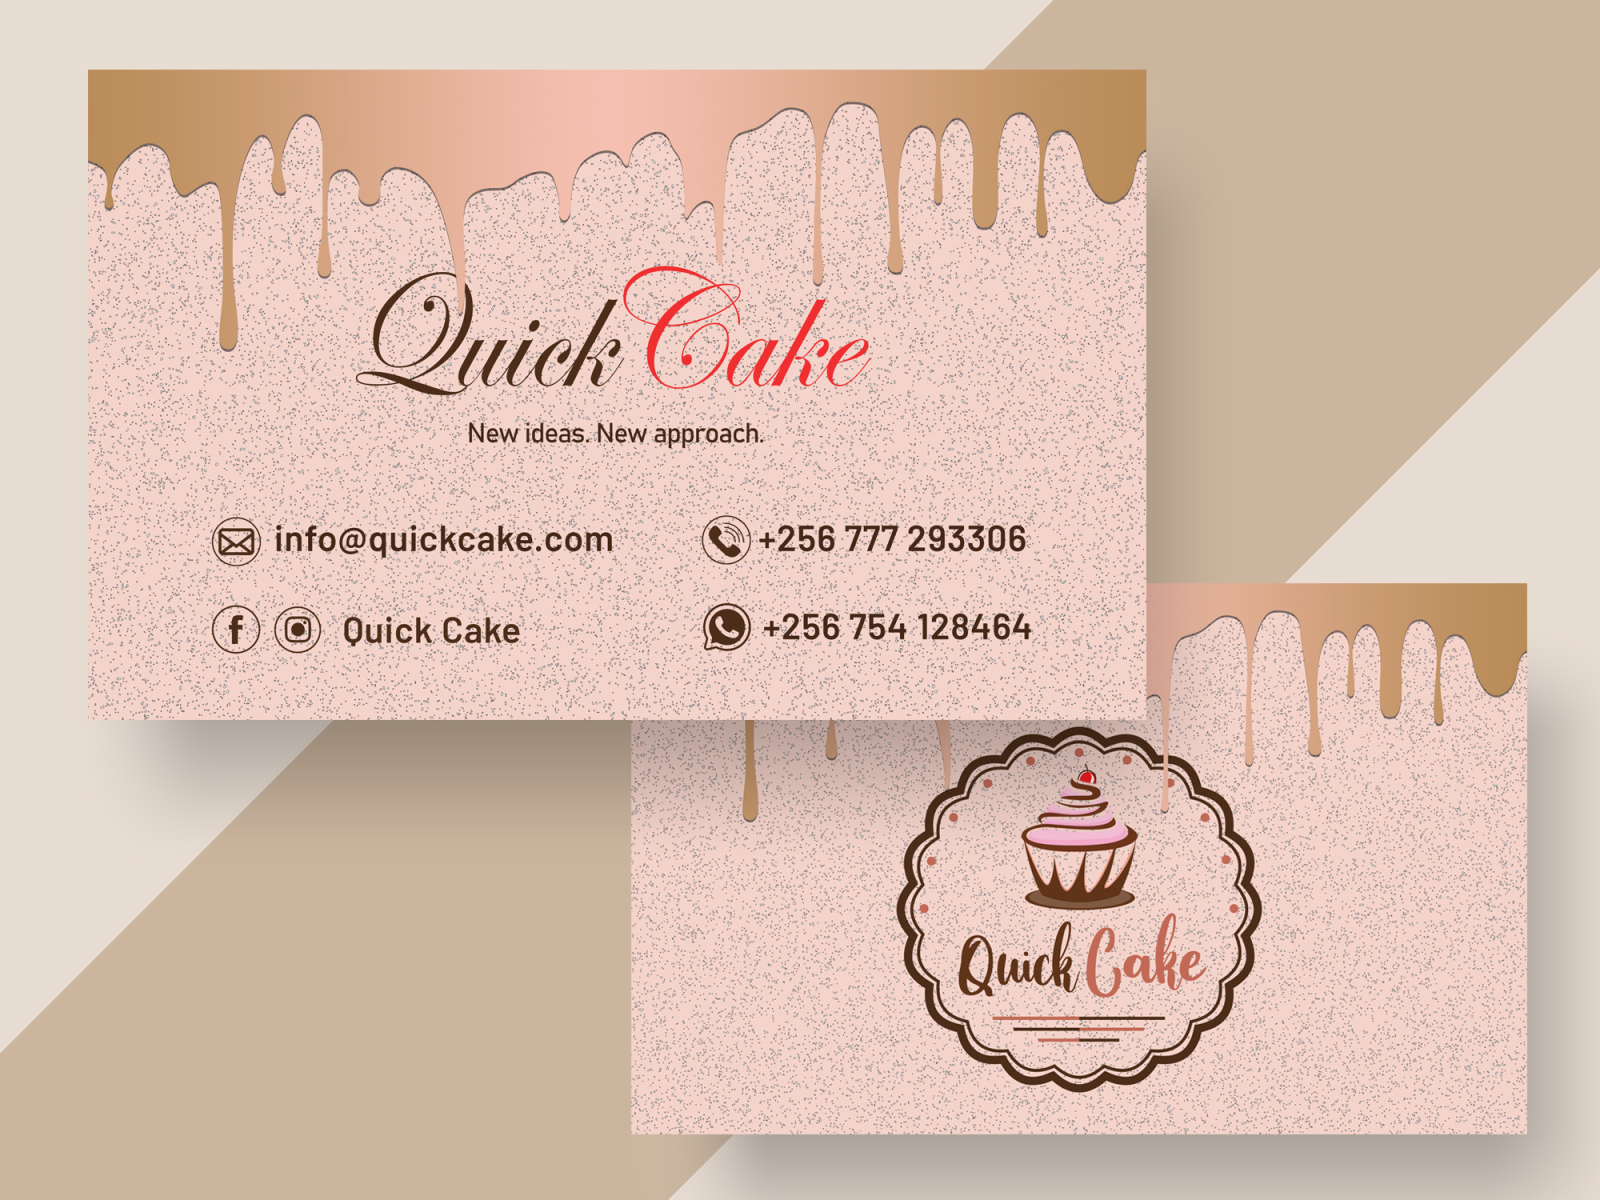 Cake Bakery Business Card Design + Free Template by Askas Jeremy Intended For Cake Business Cards Templates Free